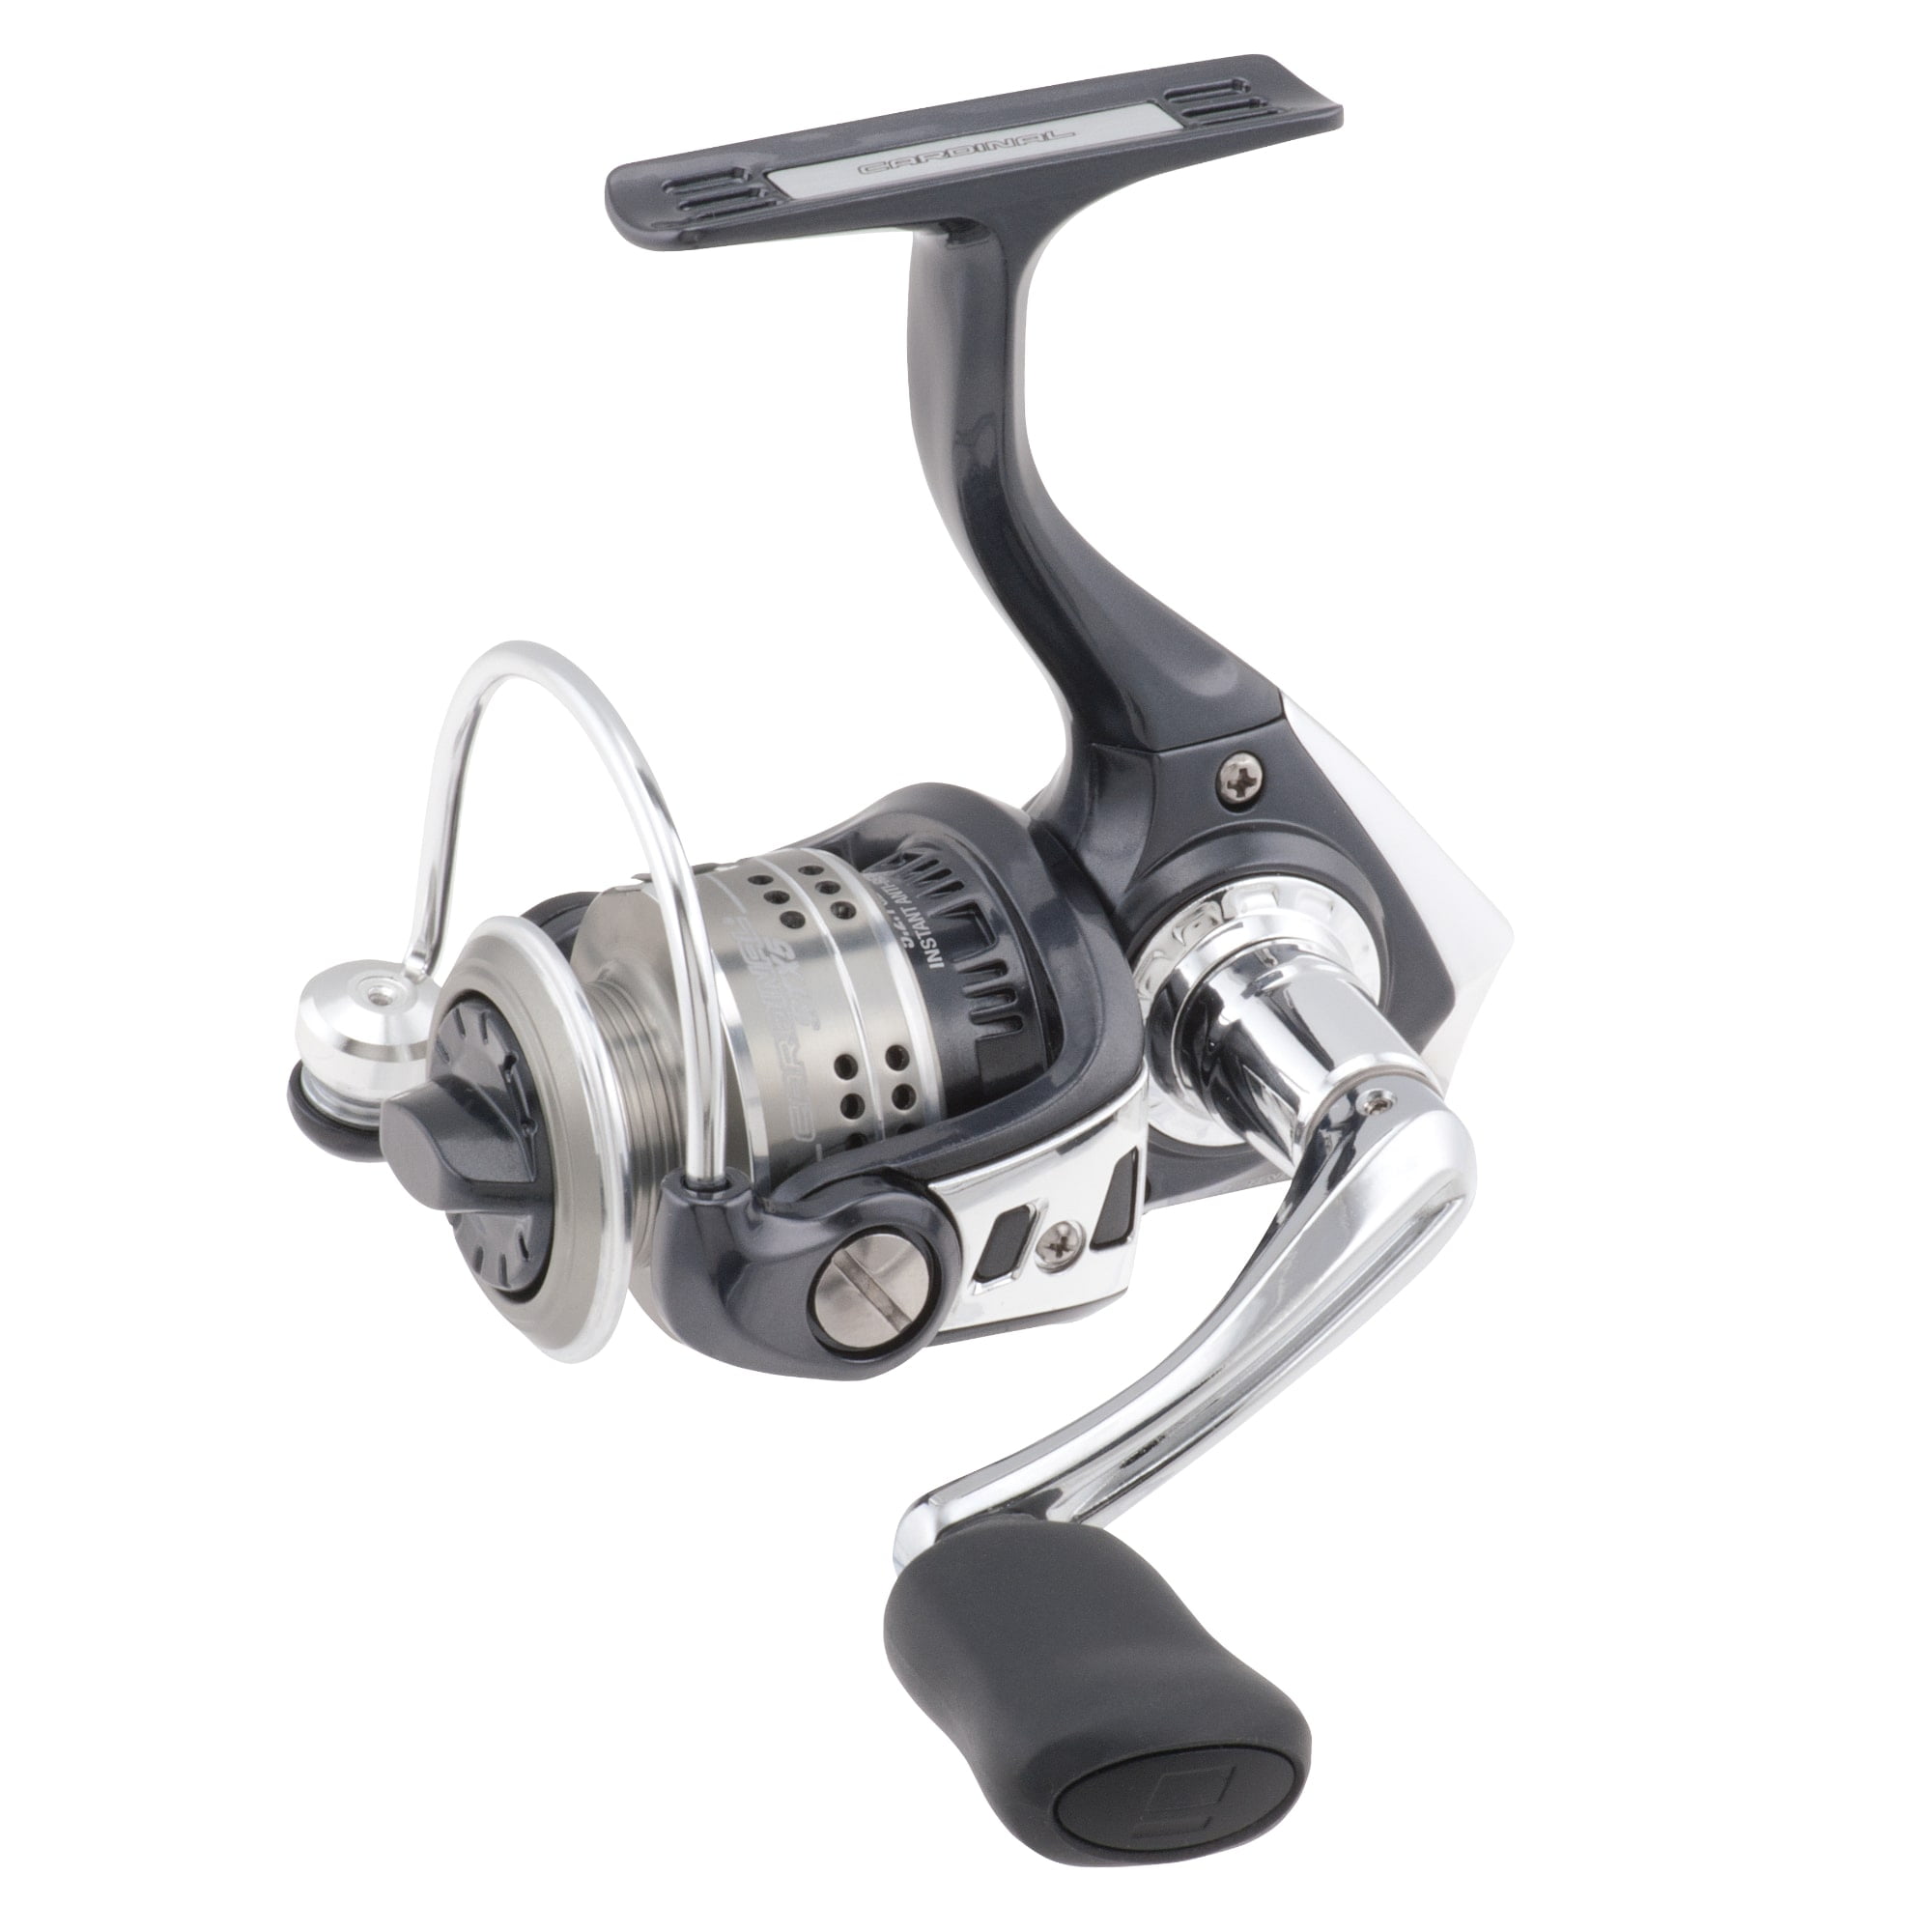 ABU GARCIA Cardinal 101 replacement spool Spinning reel spool assembly  NEW!!